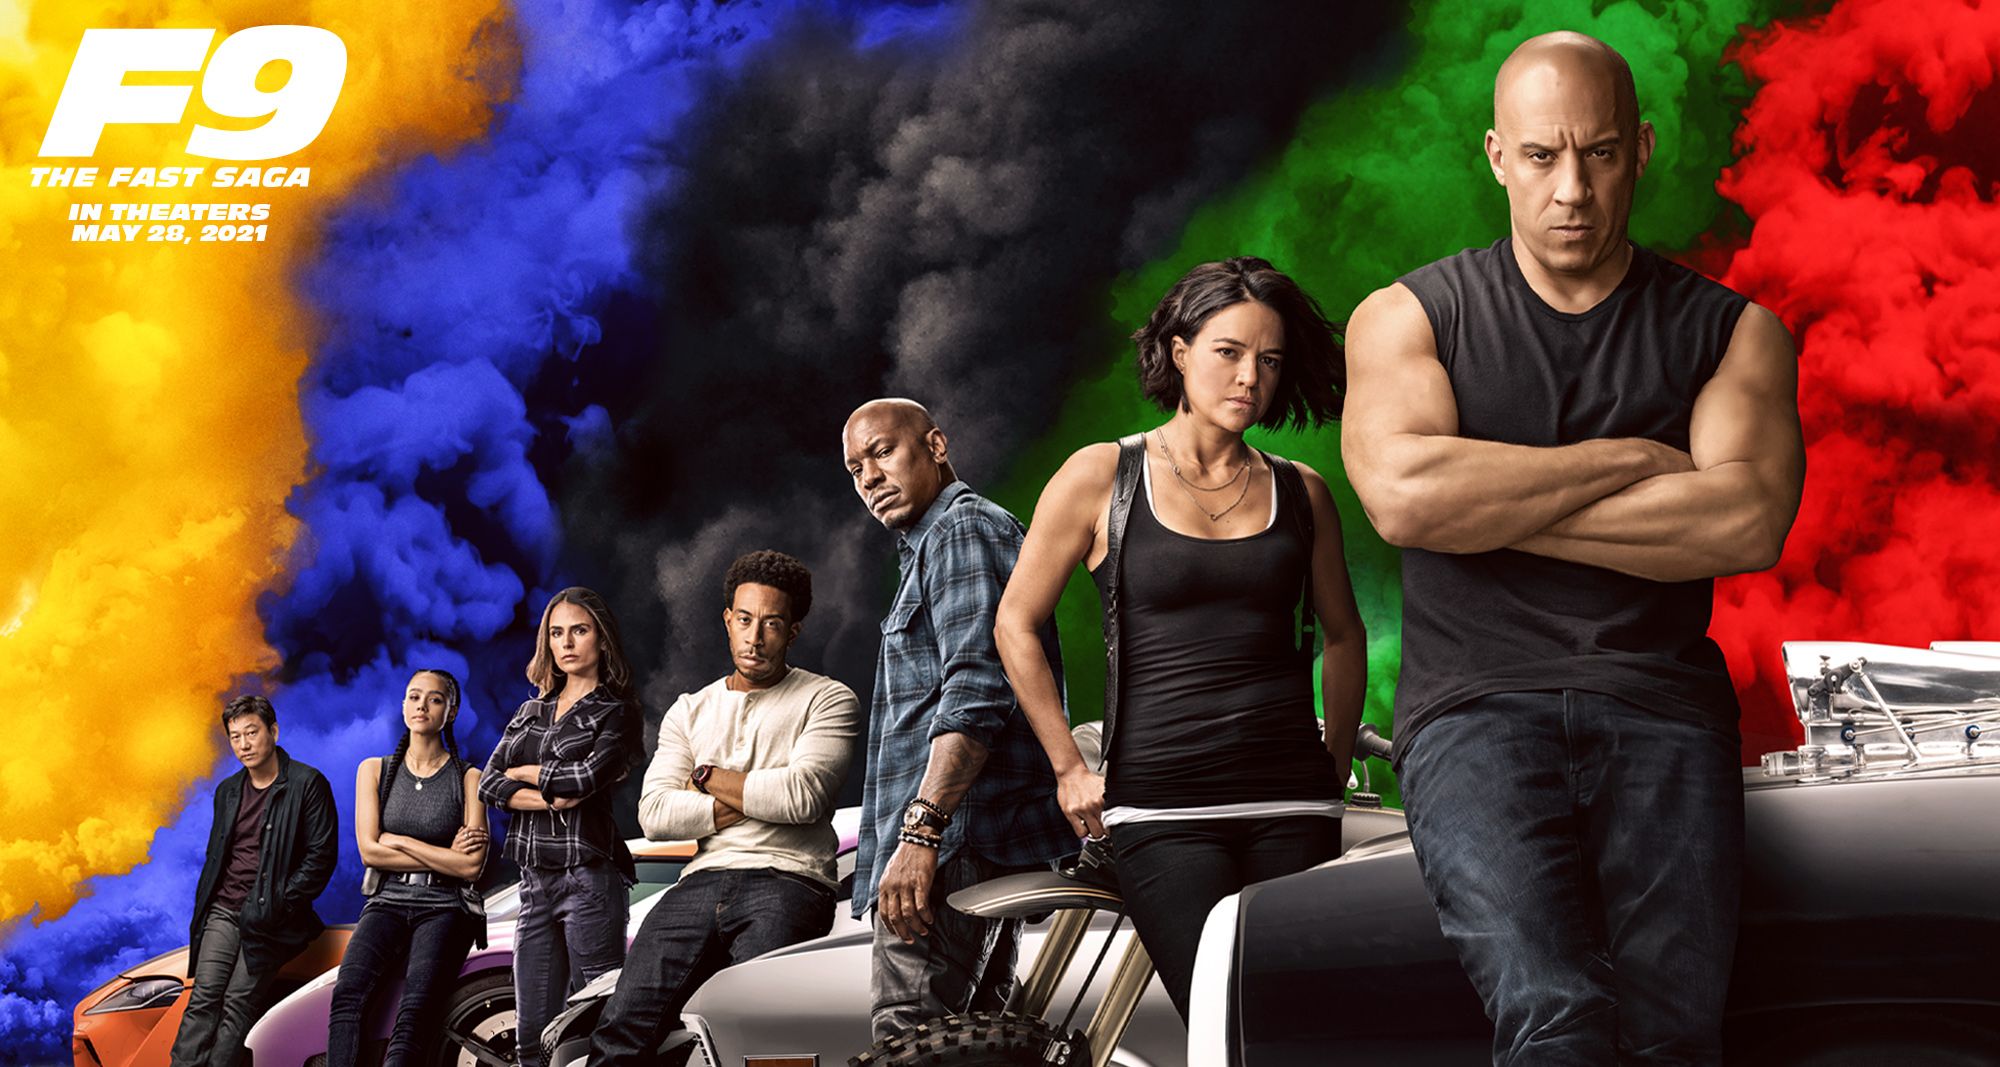 Fast and Furious 9 (F9) movie character wallpaper